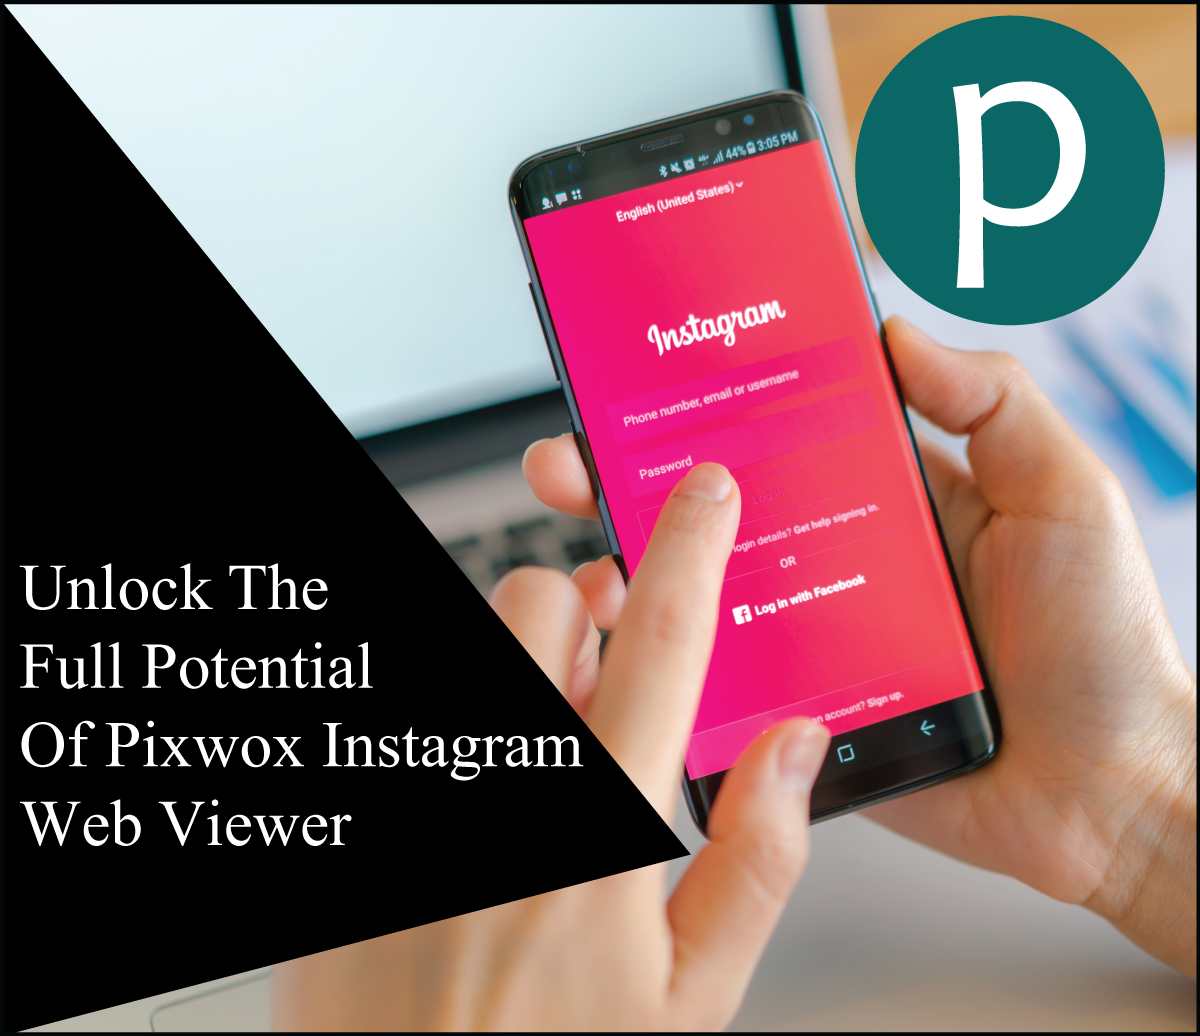 Unlock The Full Potential Of Pixwox Instagram Web Viewer